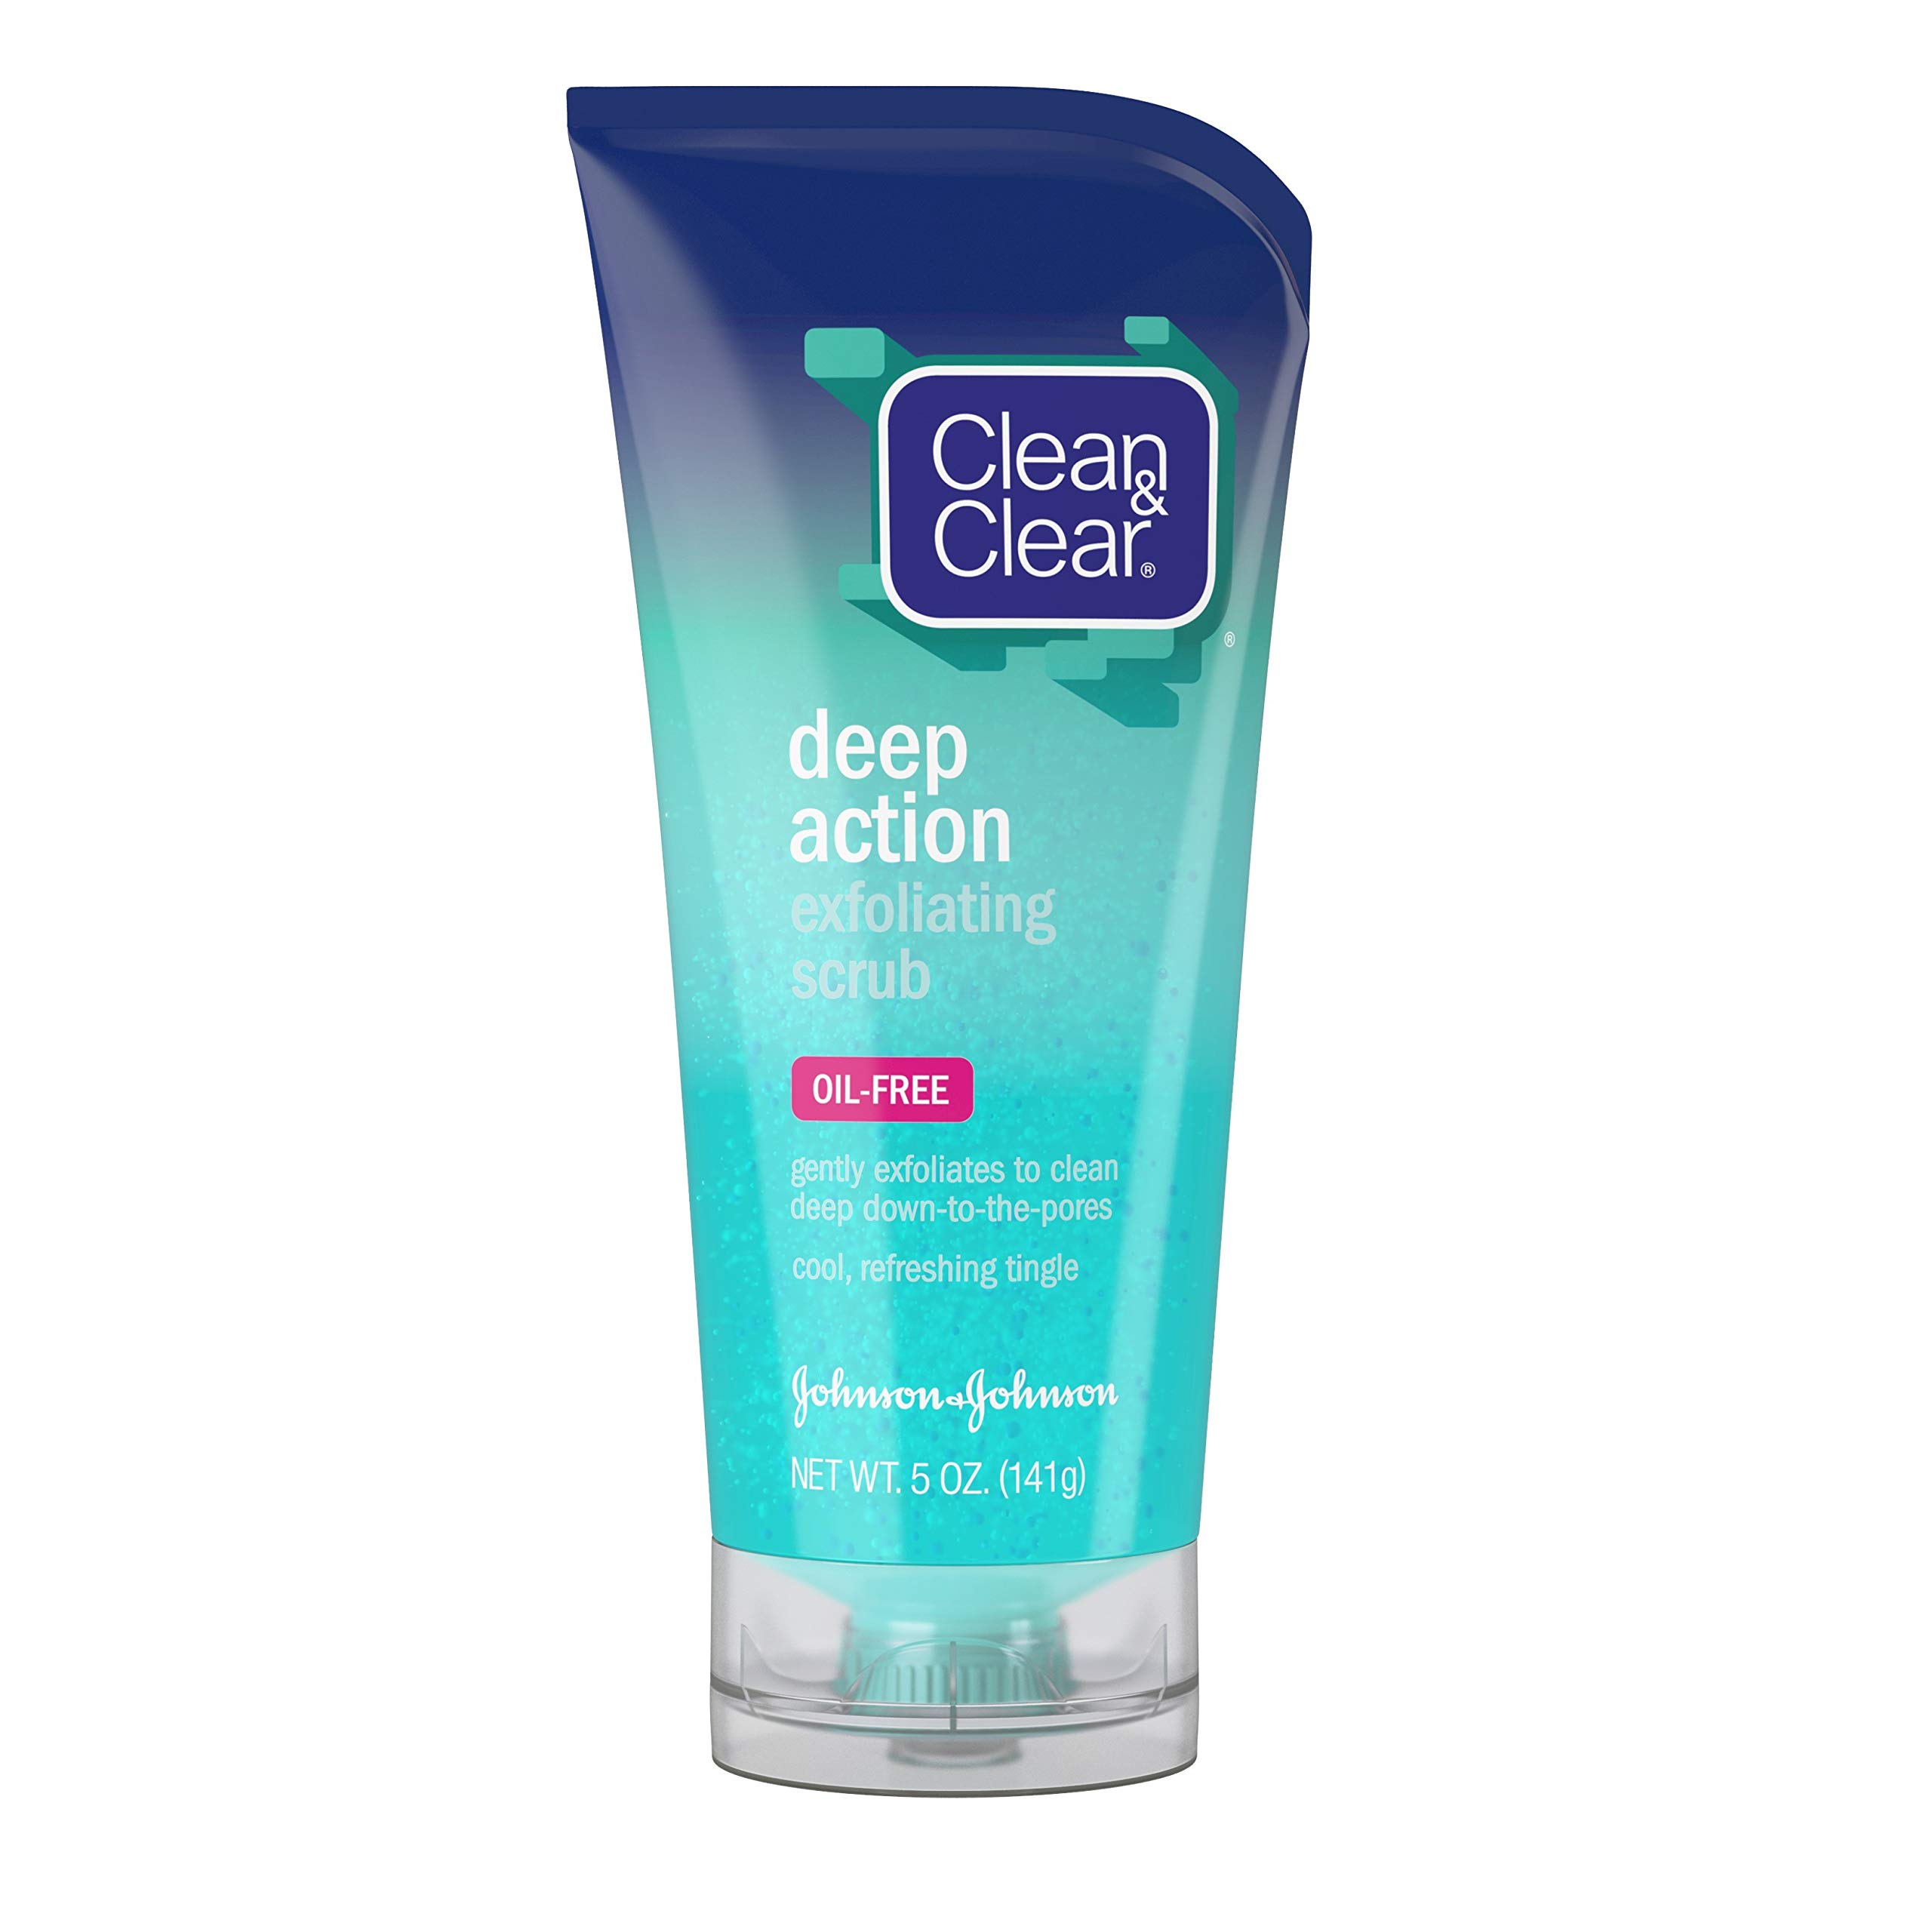 Clean & Clear Oil-Free Deep Action Exfoliating Facial Scrub, Cooling Daily Face Wash With Exfoliating Beads for Smooth Skin, Cleanses Deep Down to the Pores to Remove Dirt, Oil & Makeup, 5 oz